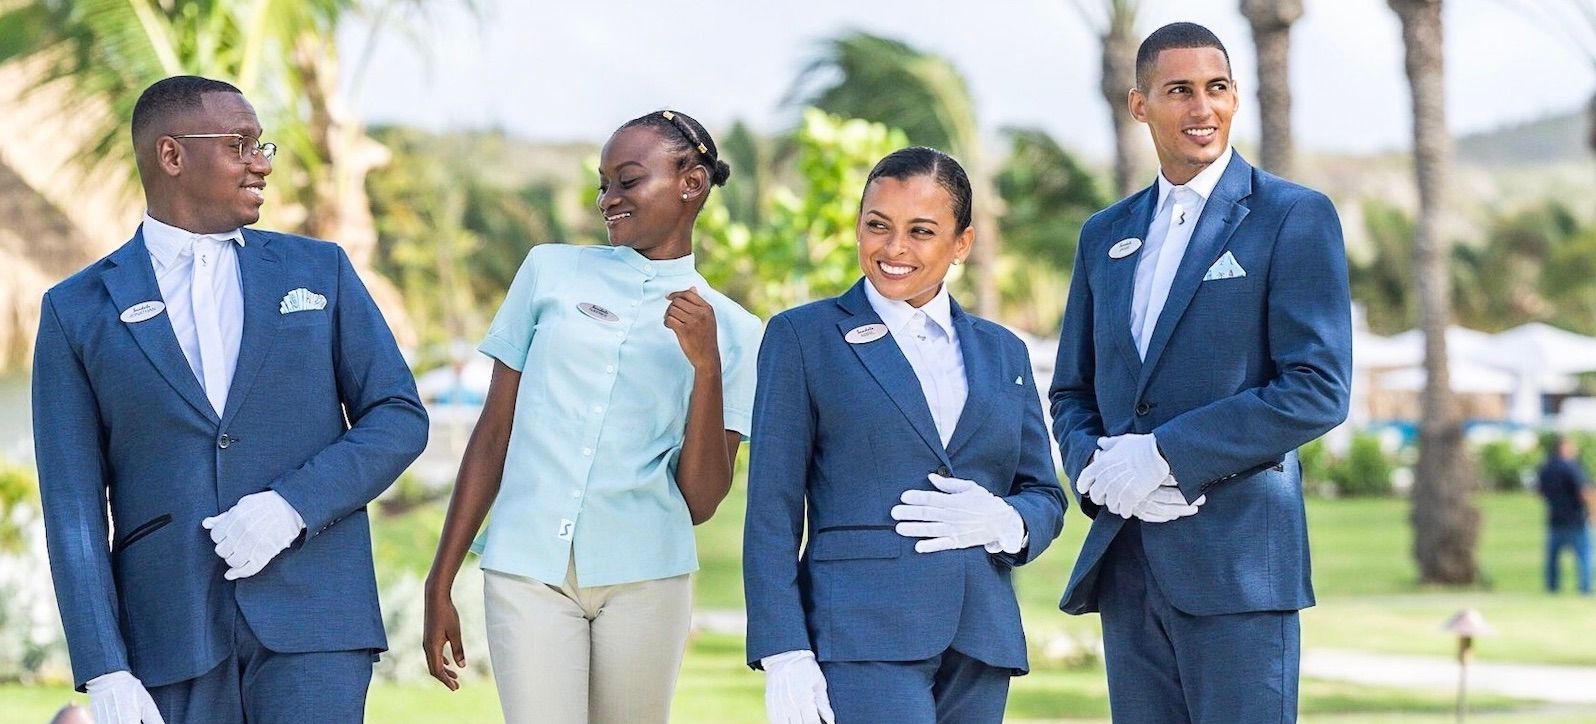 Fashion-Forward: An Inside Look at the New ‘Fits’ Debuted at Sandals Royal Curaçao